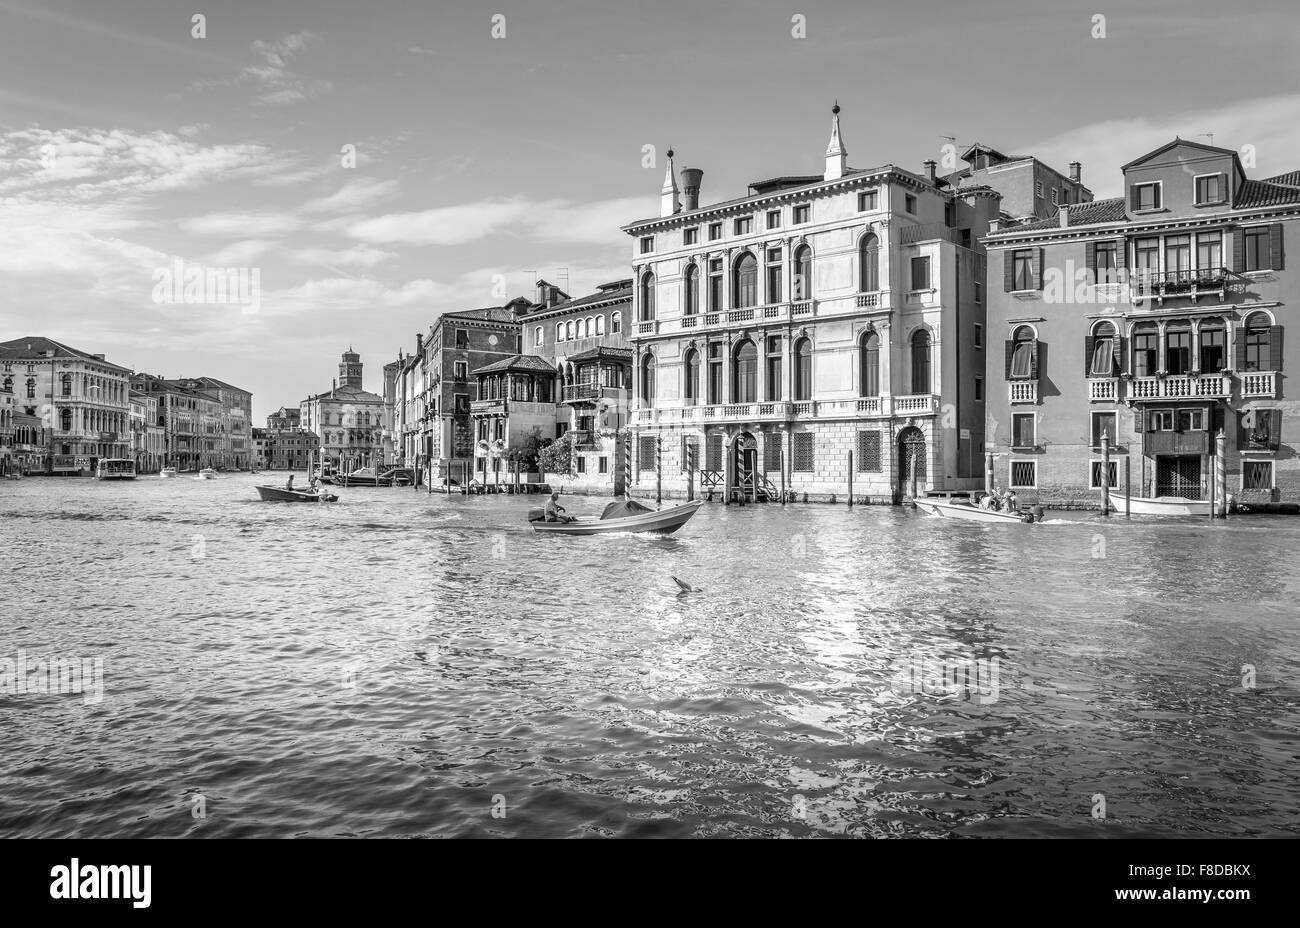 VENICE, ITALY - JUNE 29, 2015: Black and white Grand Canal with boats scenery in antique Venice, Italy Stock Photo